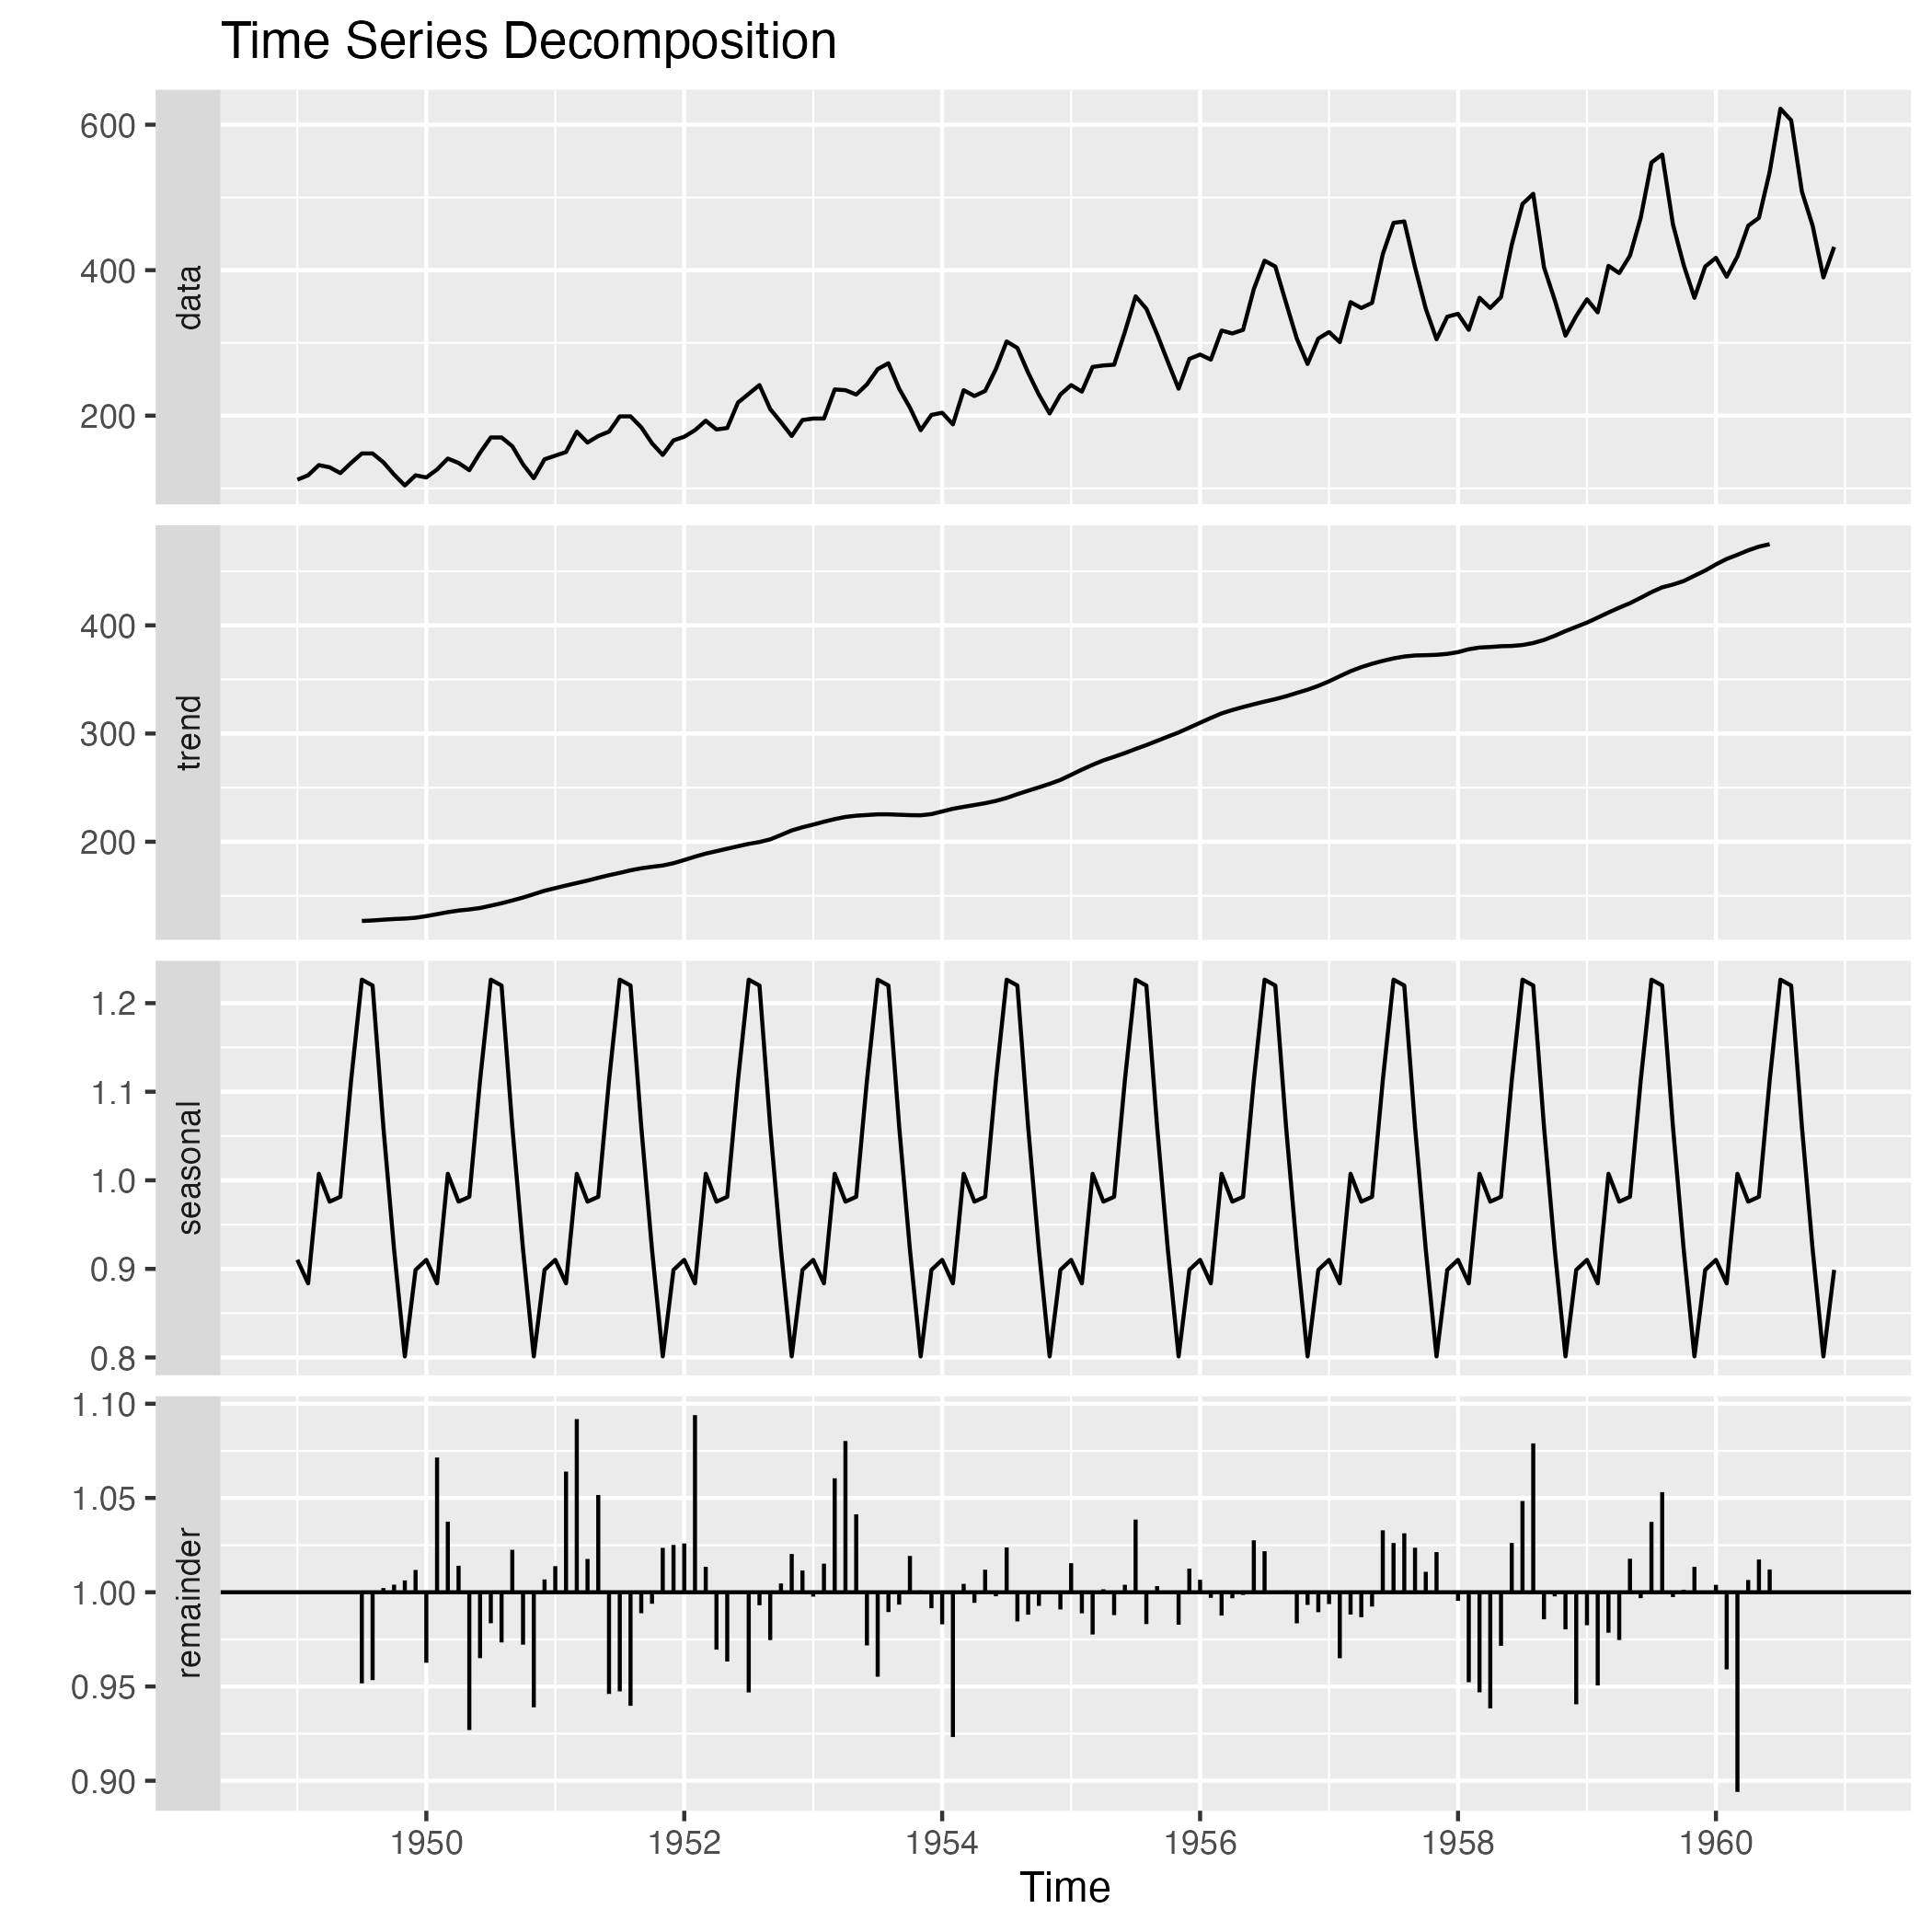 Decomposed Time Series